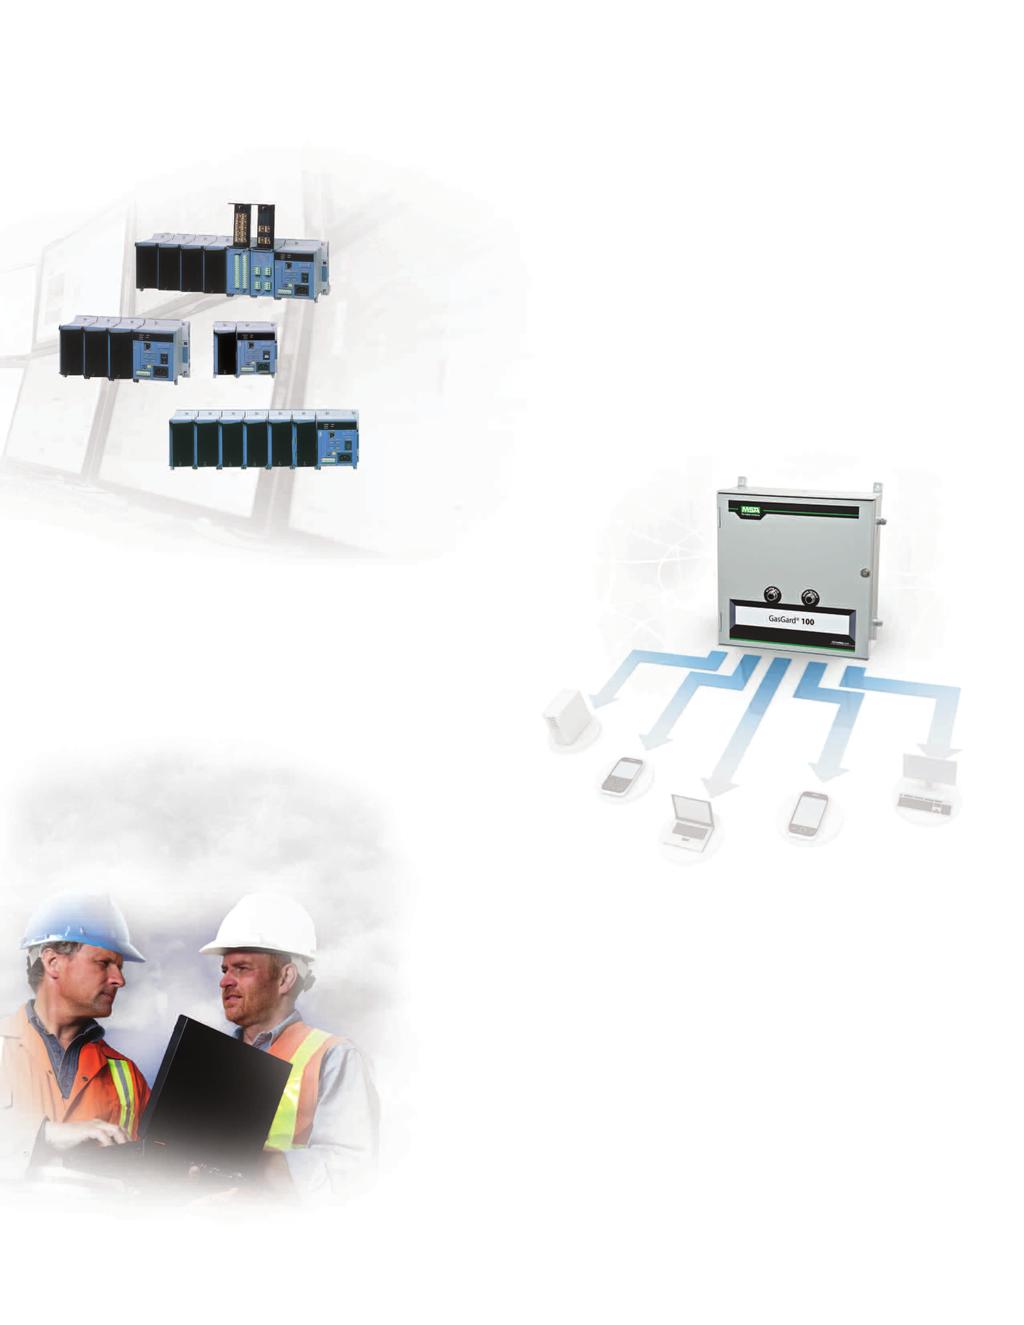 GasGard 100 Control System Highly Flexible System Configurations Main module serves as the data acquisition engine and LAN connectivity, and manages anywhere from one to six I/O modules on the